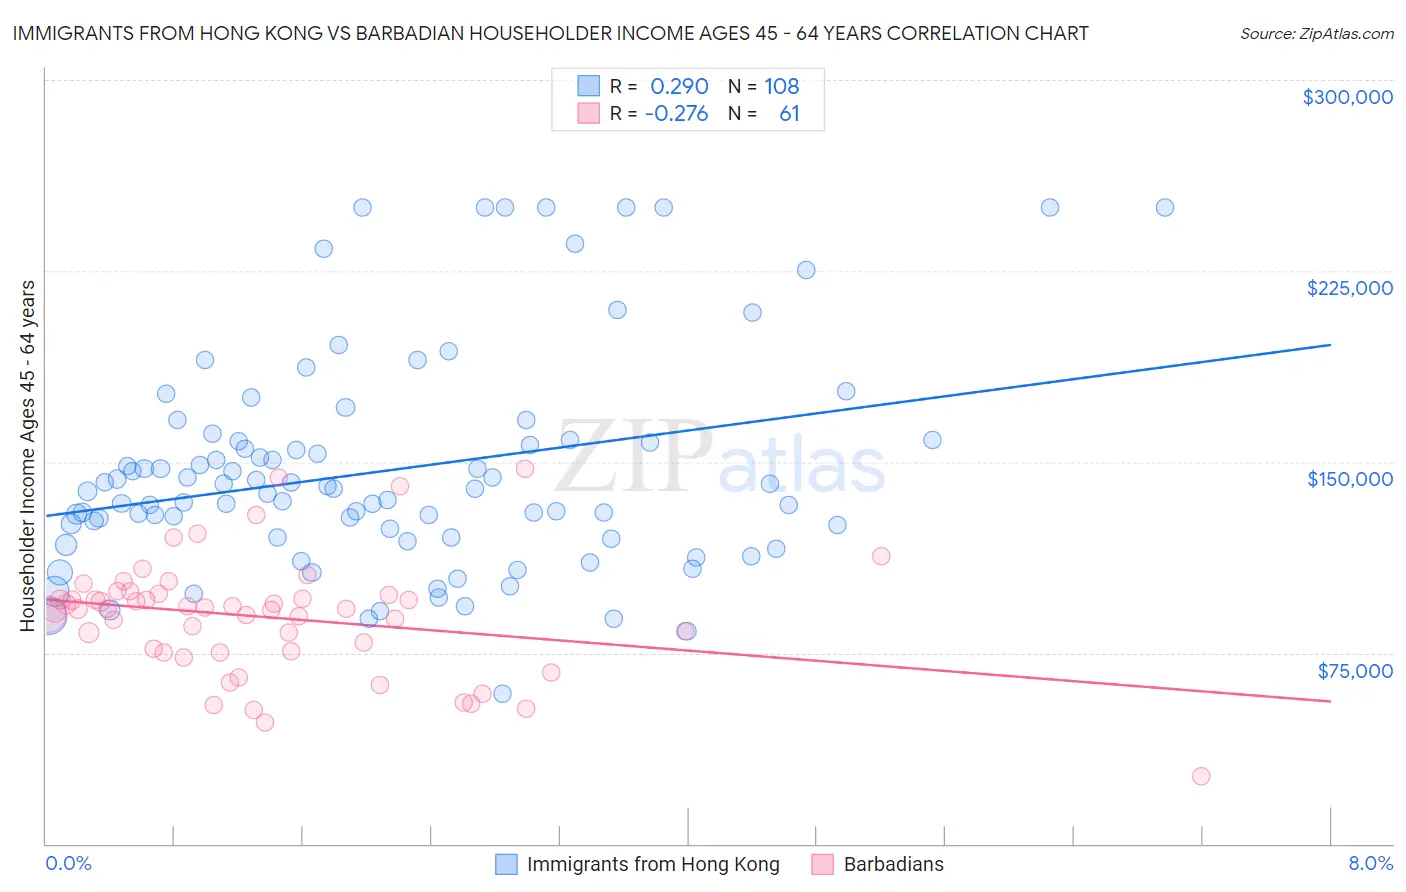 Immigrants from Hong Kong vs Barbadian Householder Income Ages 45 - 64 years